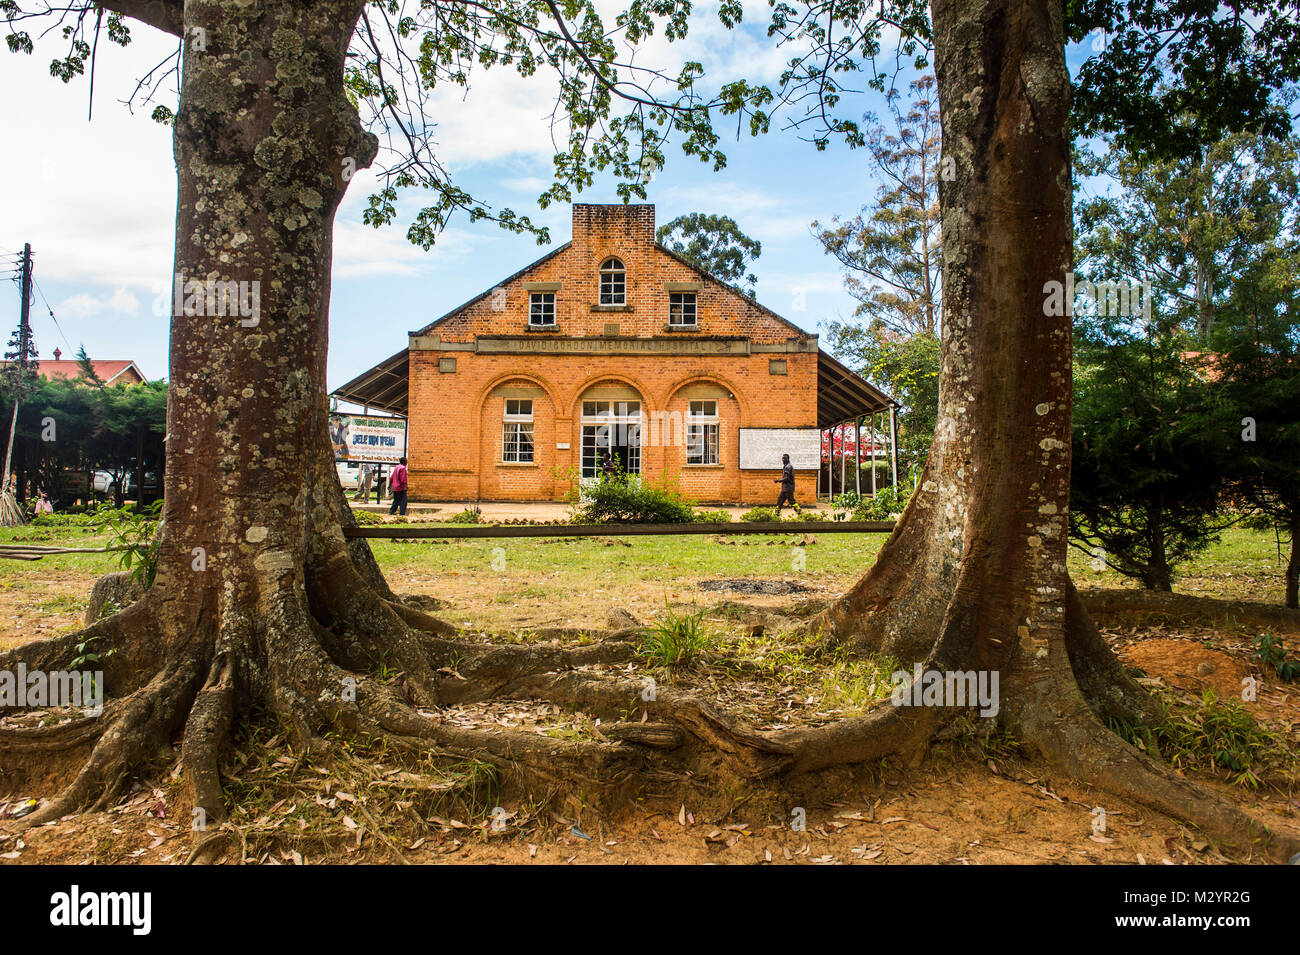 The old hospital of Livingstonia, Malawi, Africa Stock Photo